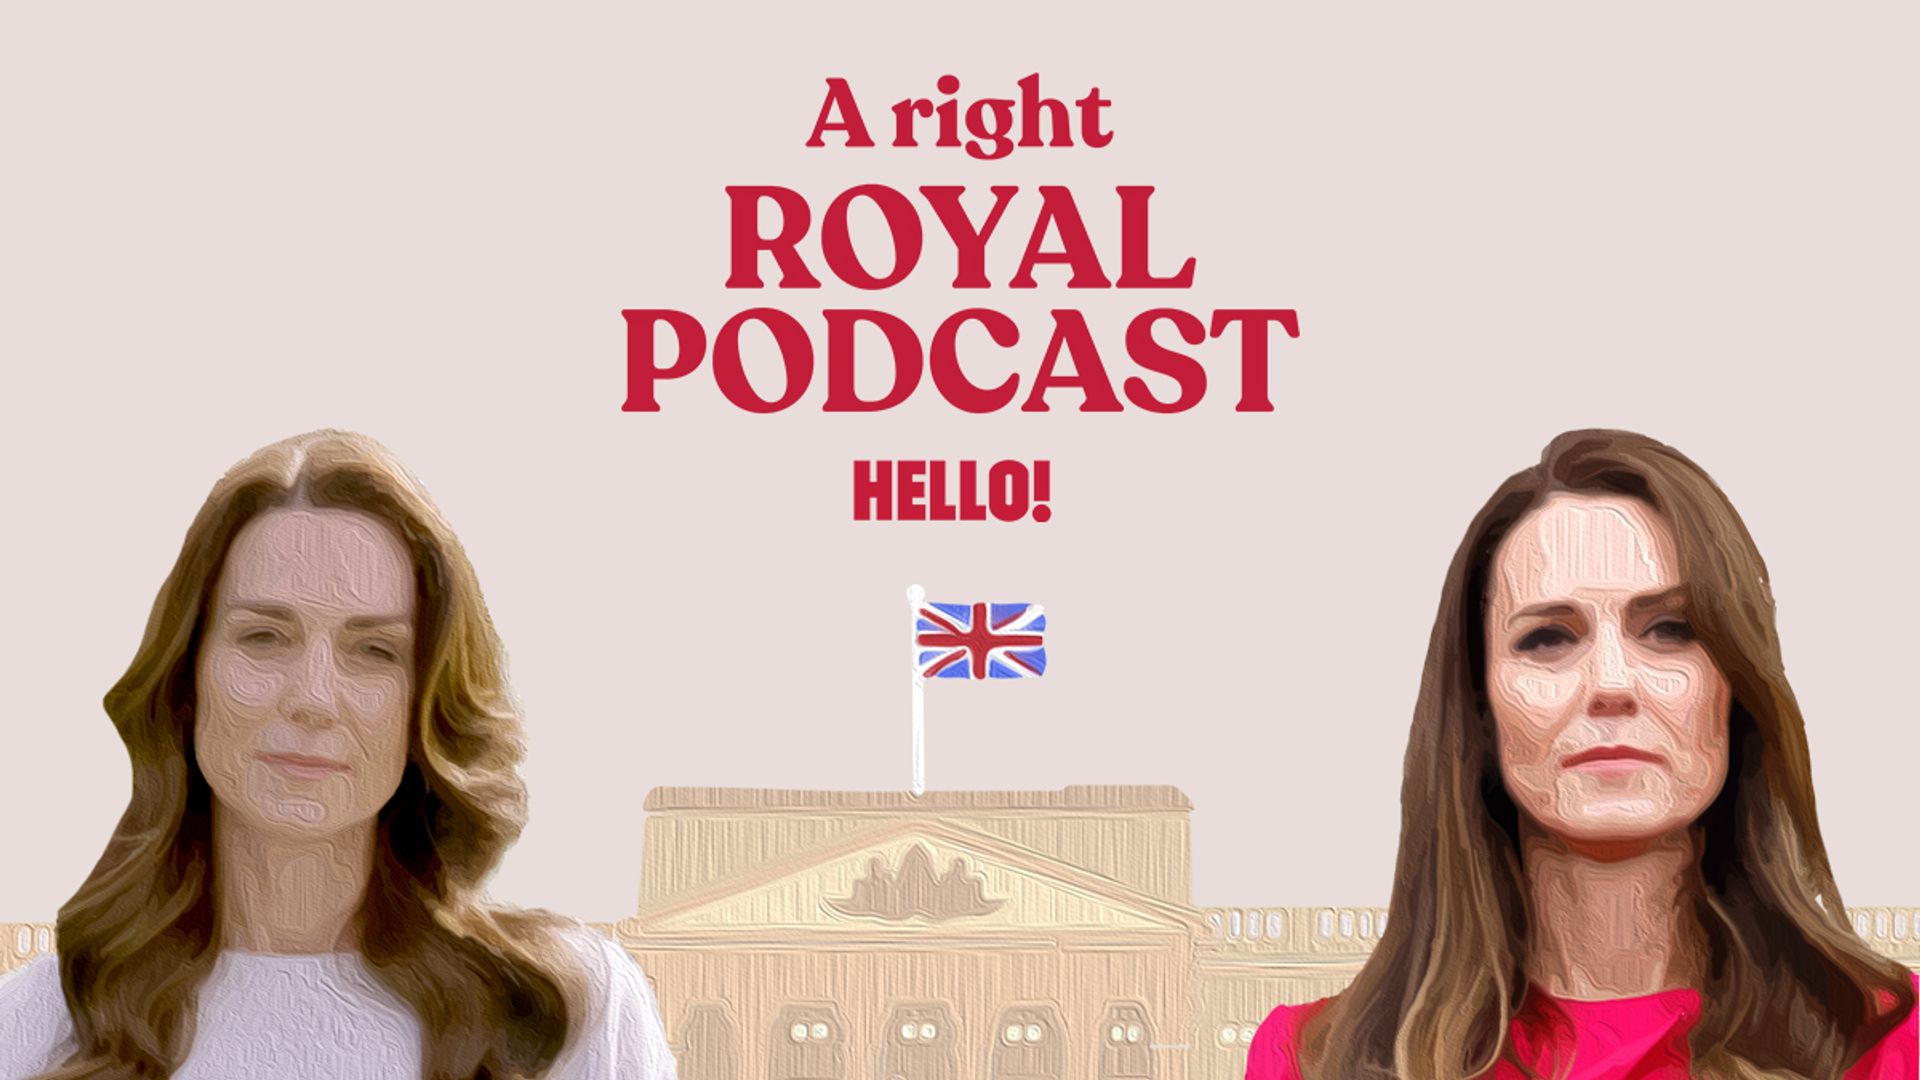 Two photos of Kate Middleton to promote a right royal podcast